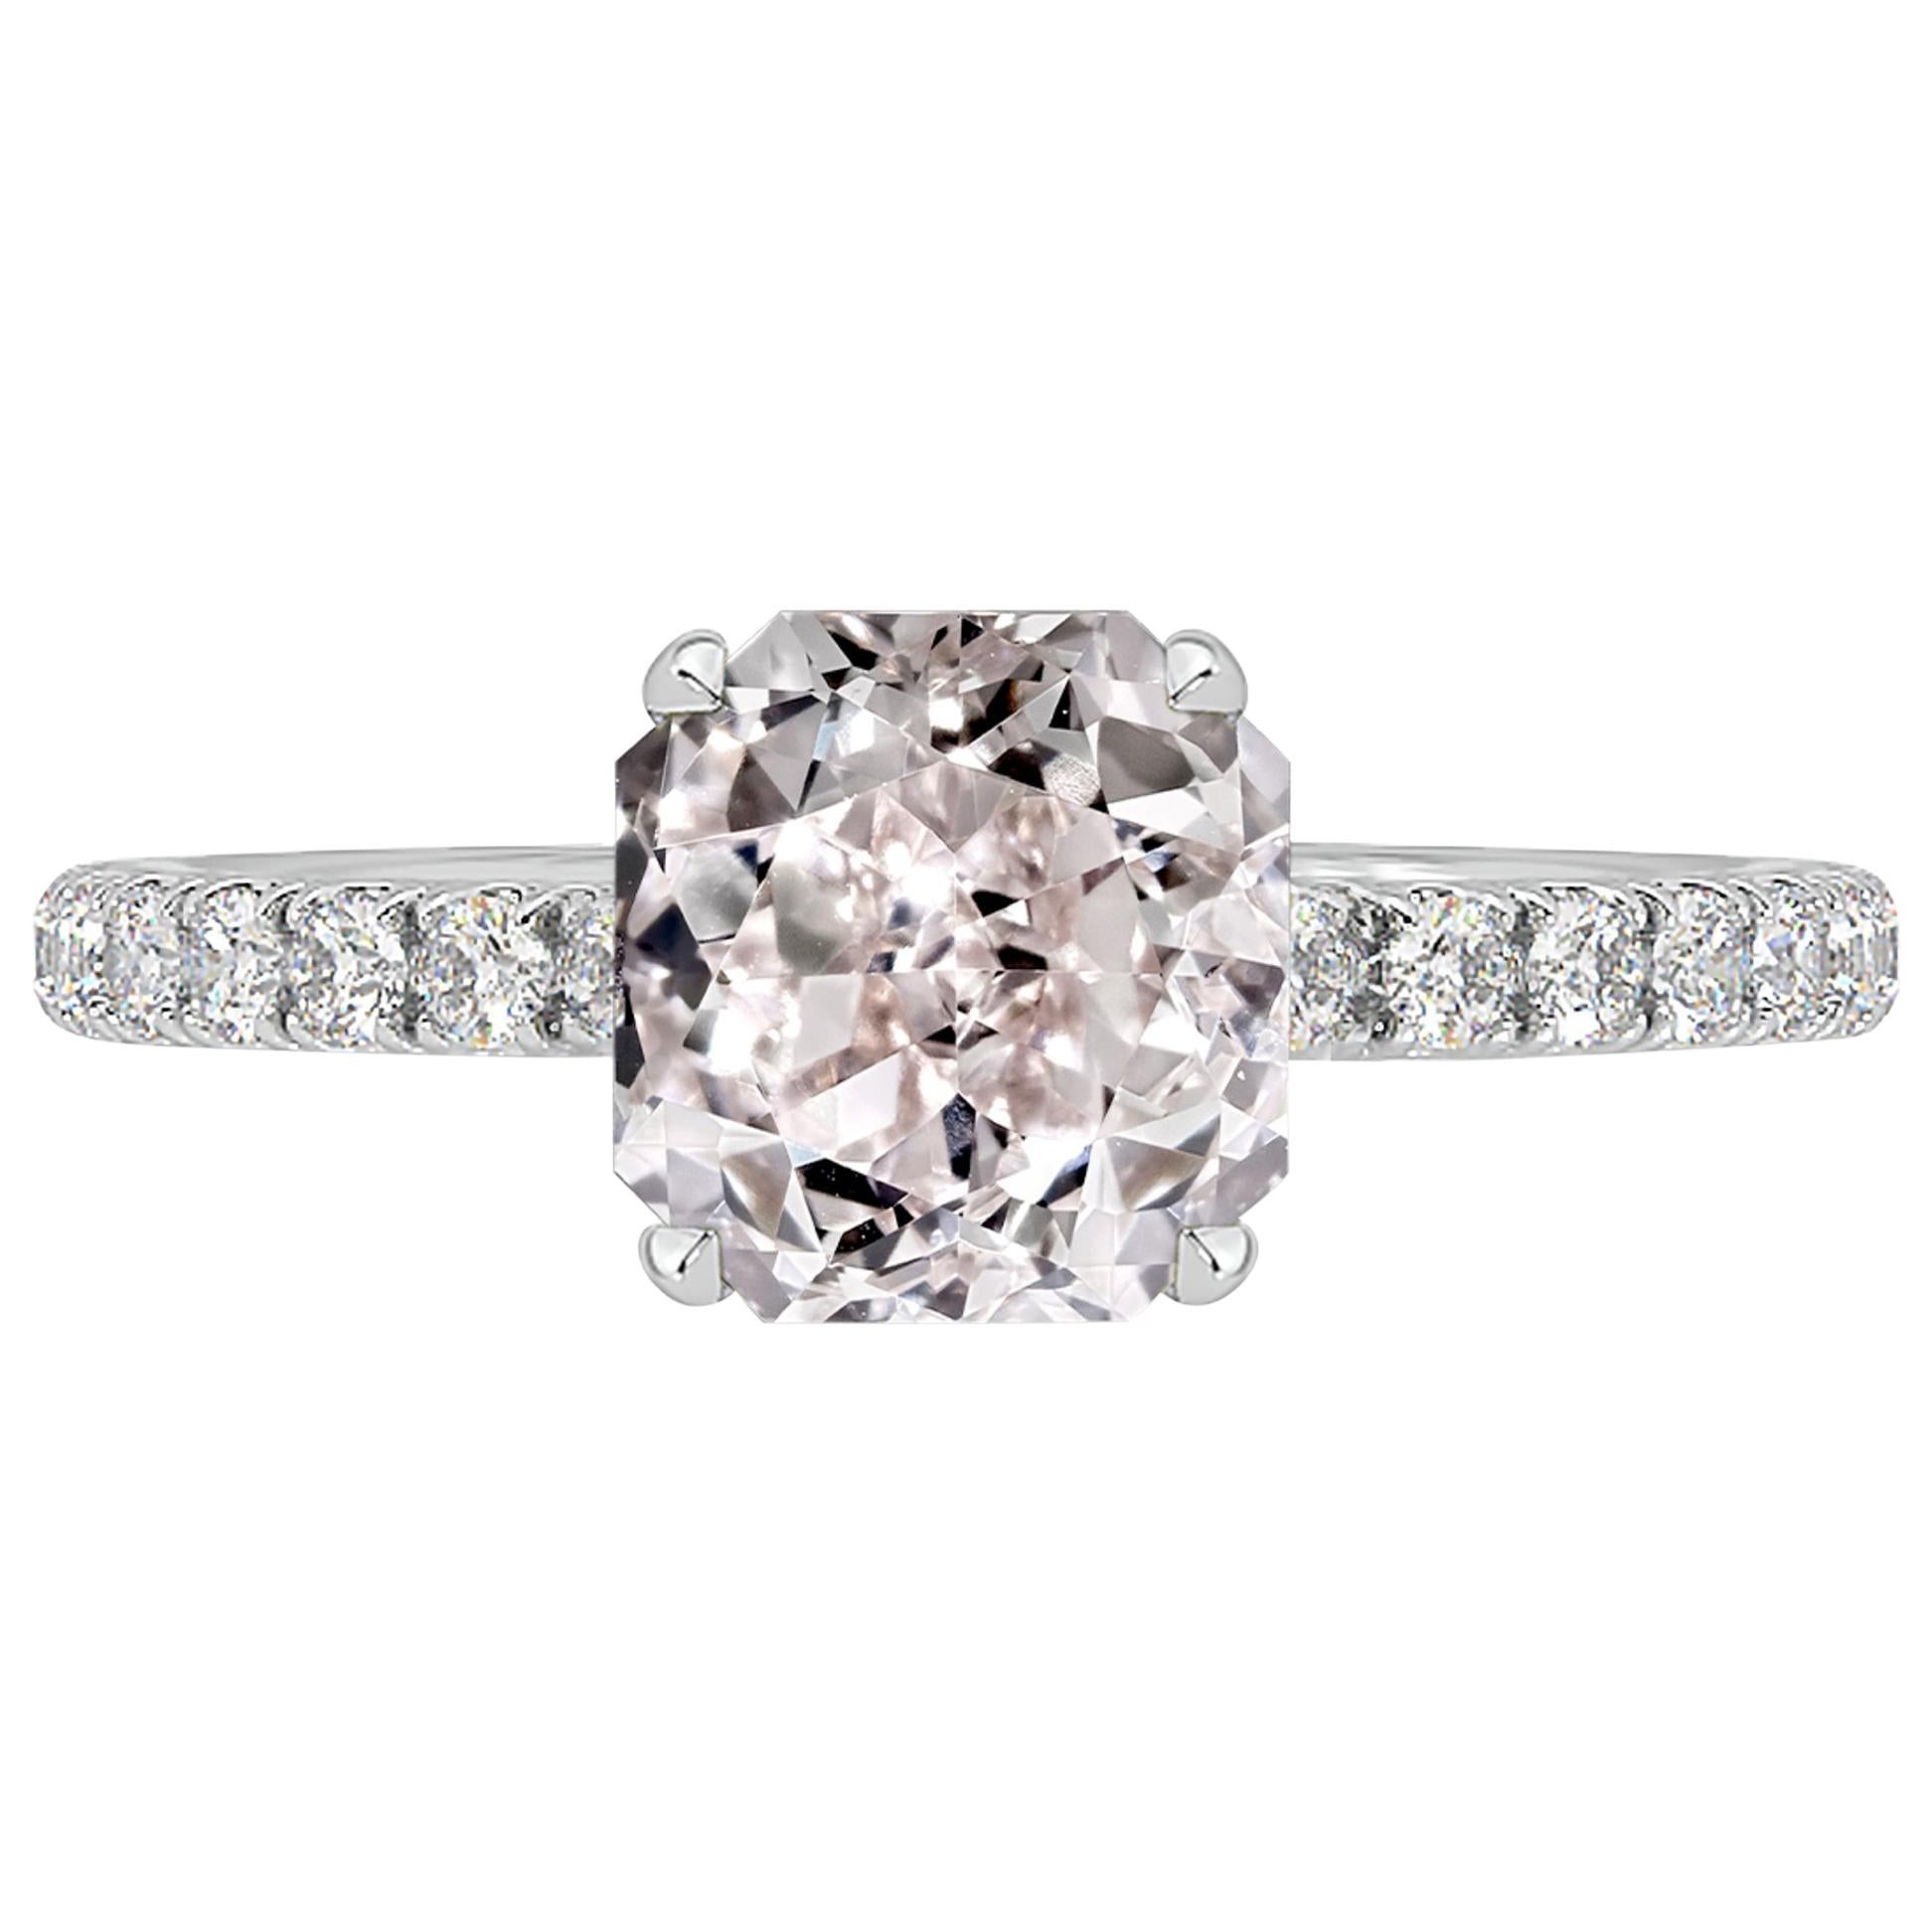 GIA Certified 0.93 Carat Radiant Cut Pink Diamond Ring For Sale